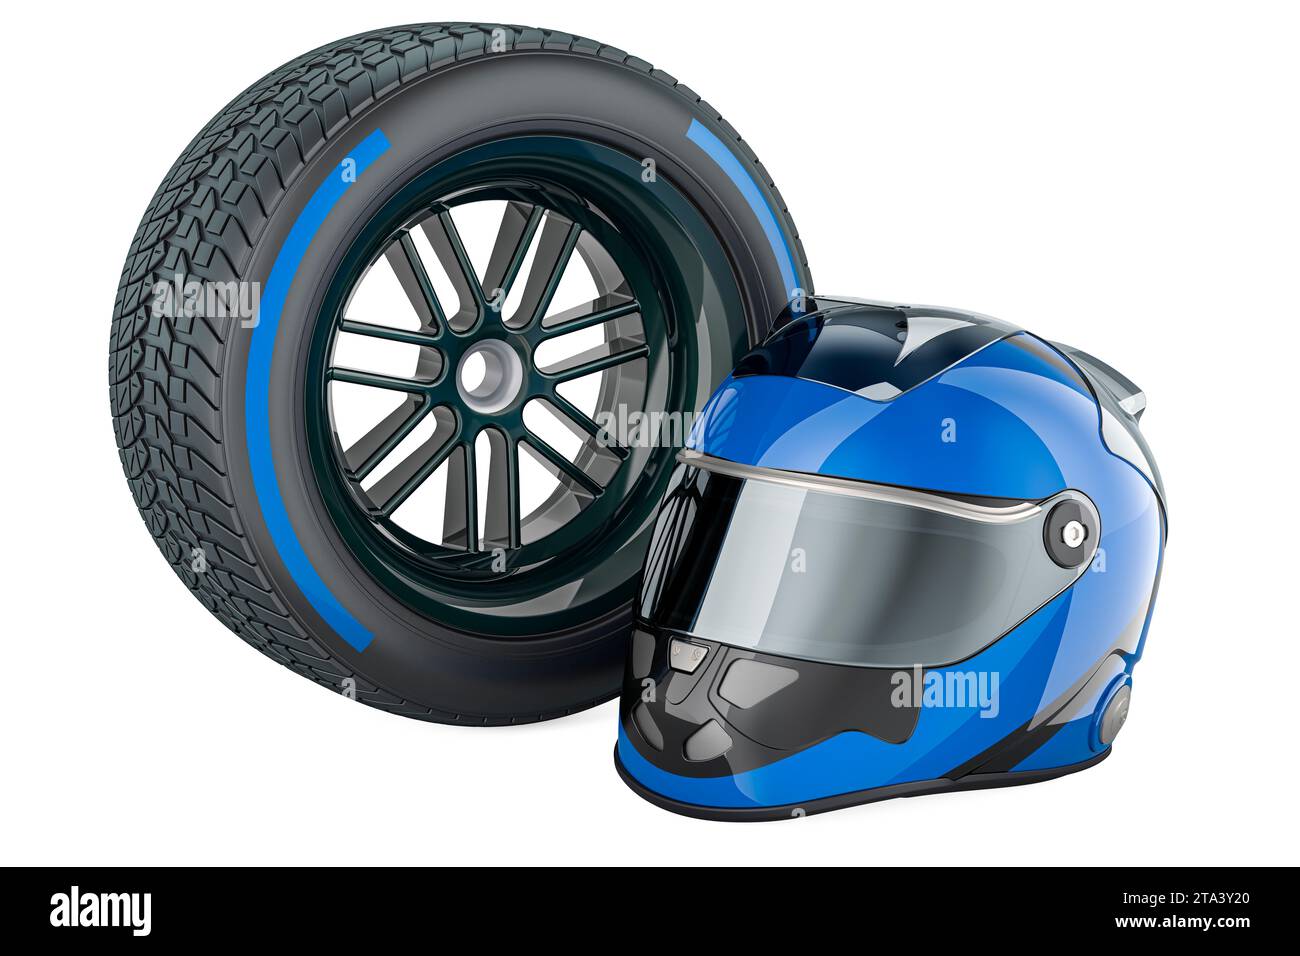 Racing Helmet with racing wheel Blue Wet, compound type tyre. 3D rendering isolated on white background Stock Photo